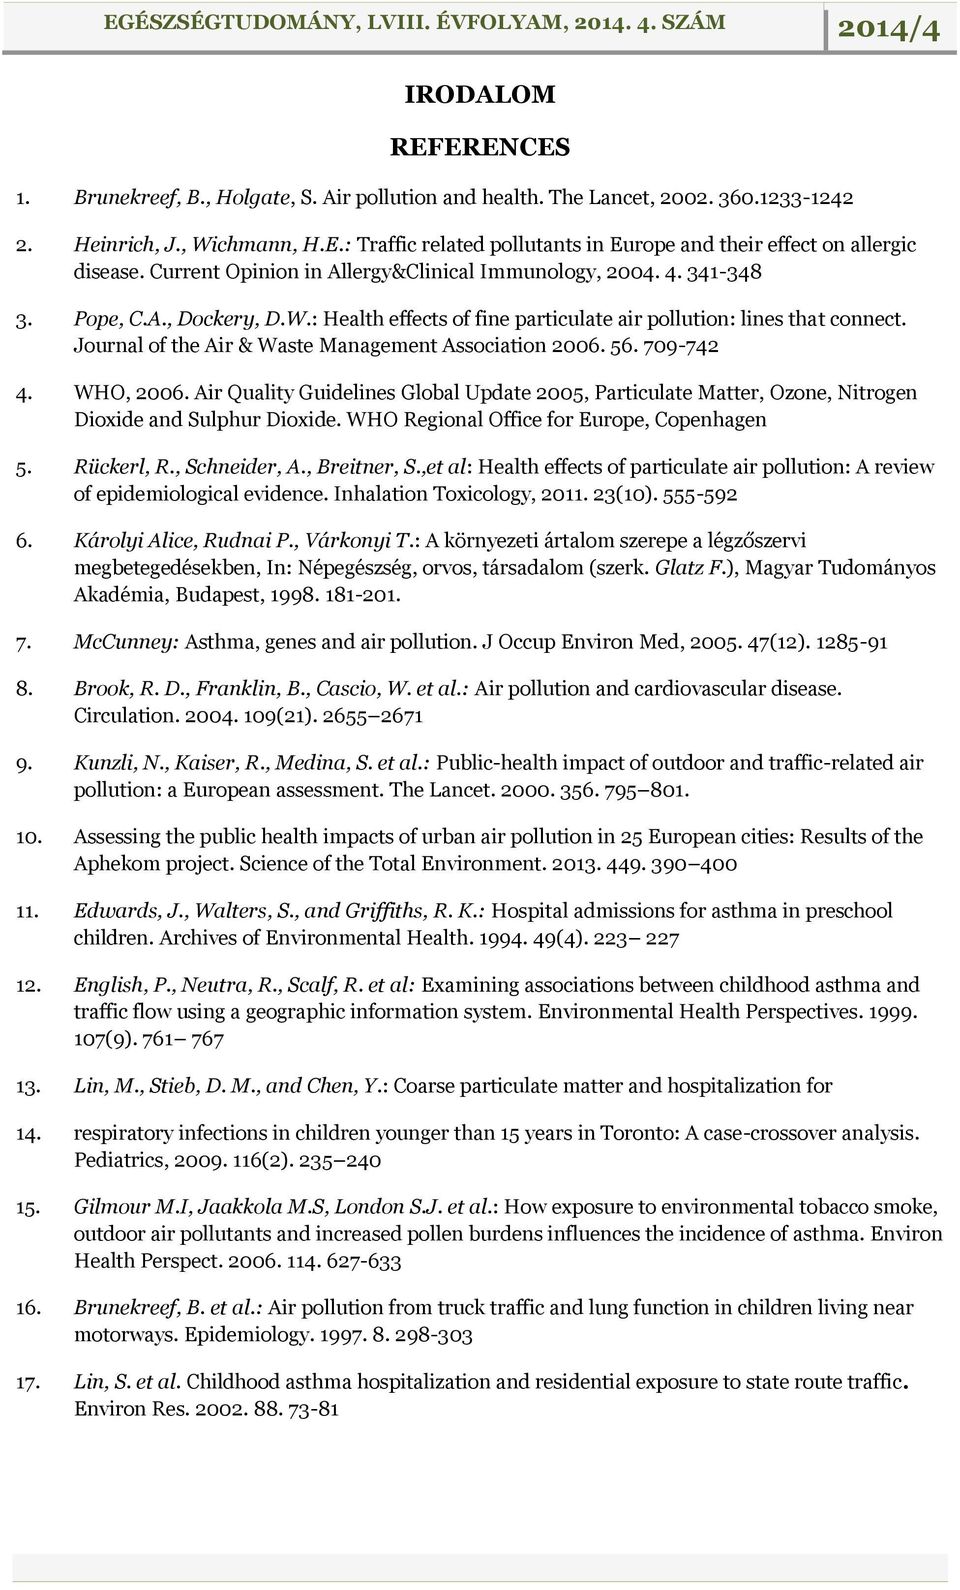 Journal of the Air & Waste Management Association 2006. 56. 709-742 4. WHO, 2006. Air Quality Guidelines Global Update 2005, Particulate Matter, Ozone, Nitrogen Dioxide and Sulphur Dioxide.